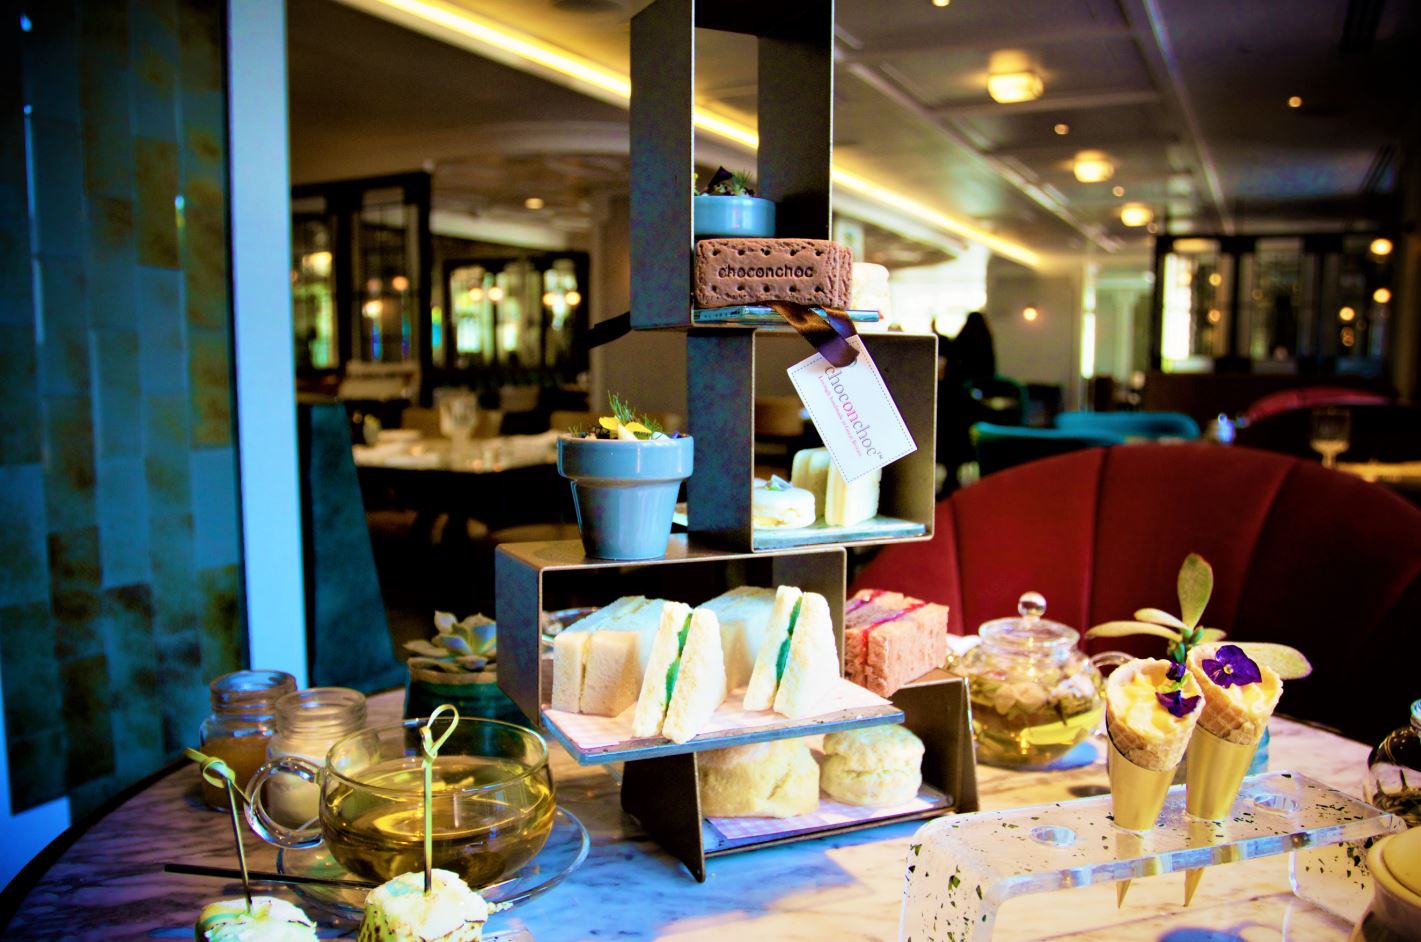 CHOC ON CHOC CELEBRATES NATIONAL AFTERNOON TEA WEEK WITH THE MARRIOTT PARK LANE HOTEL